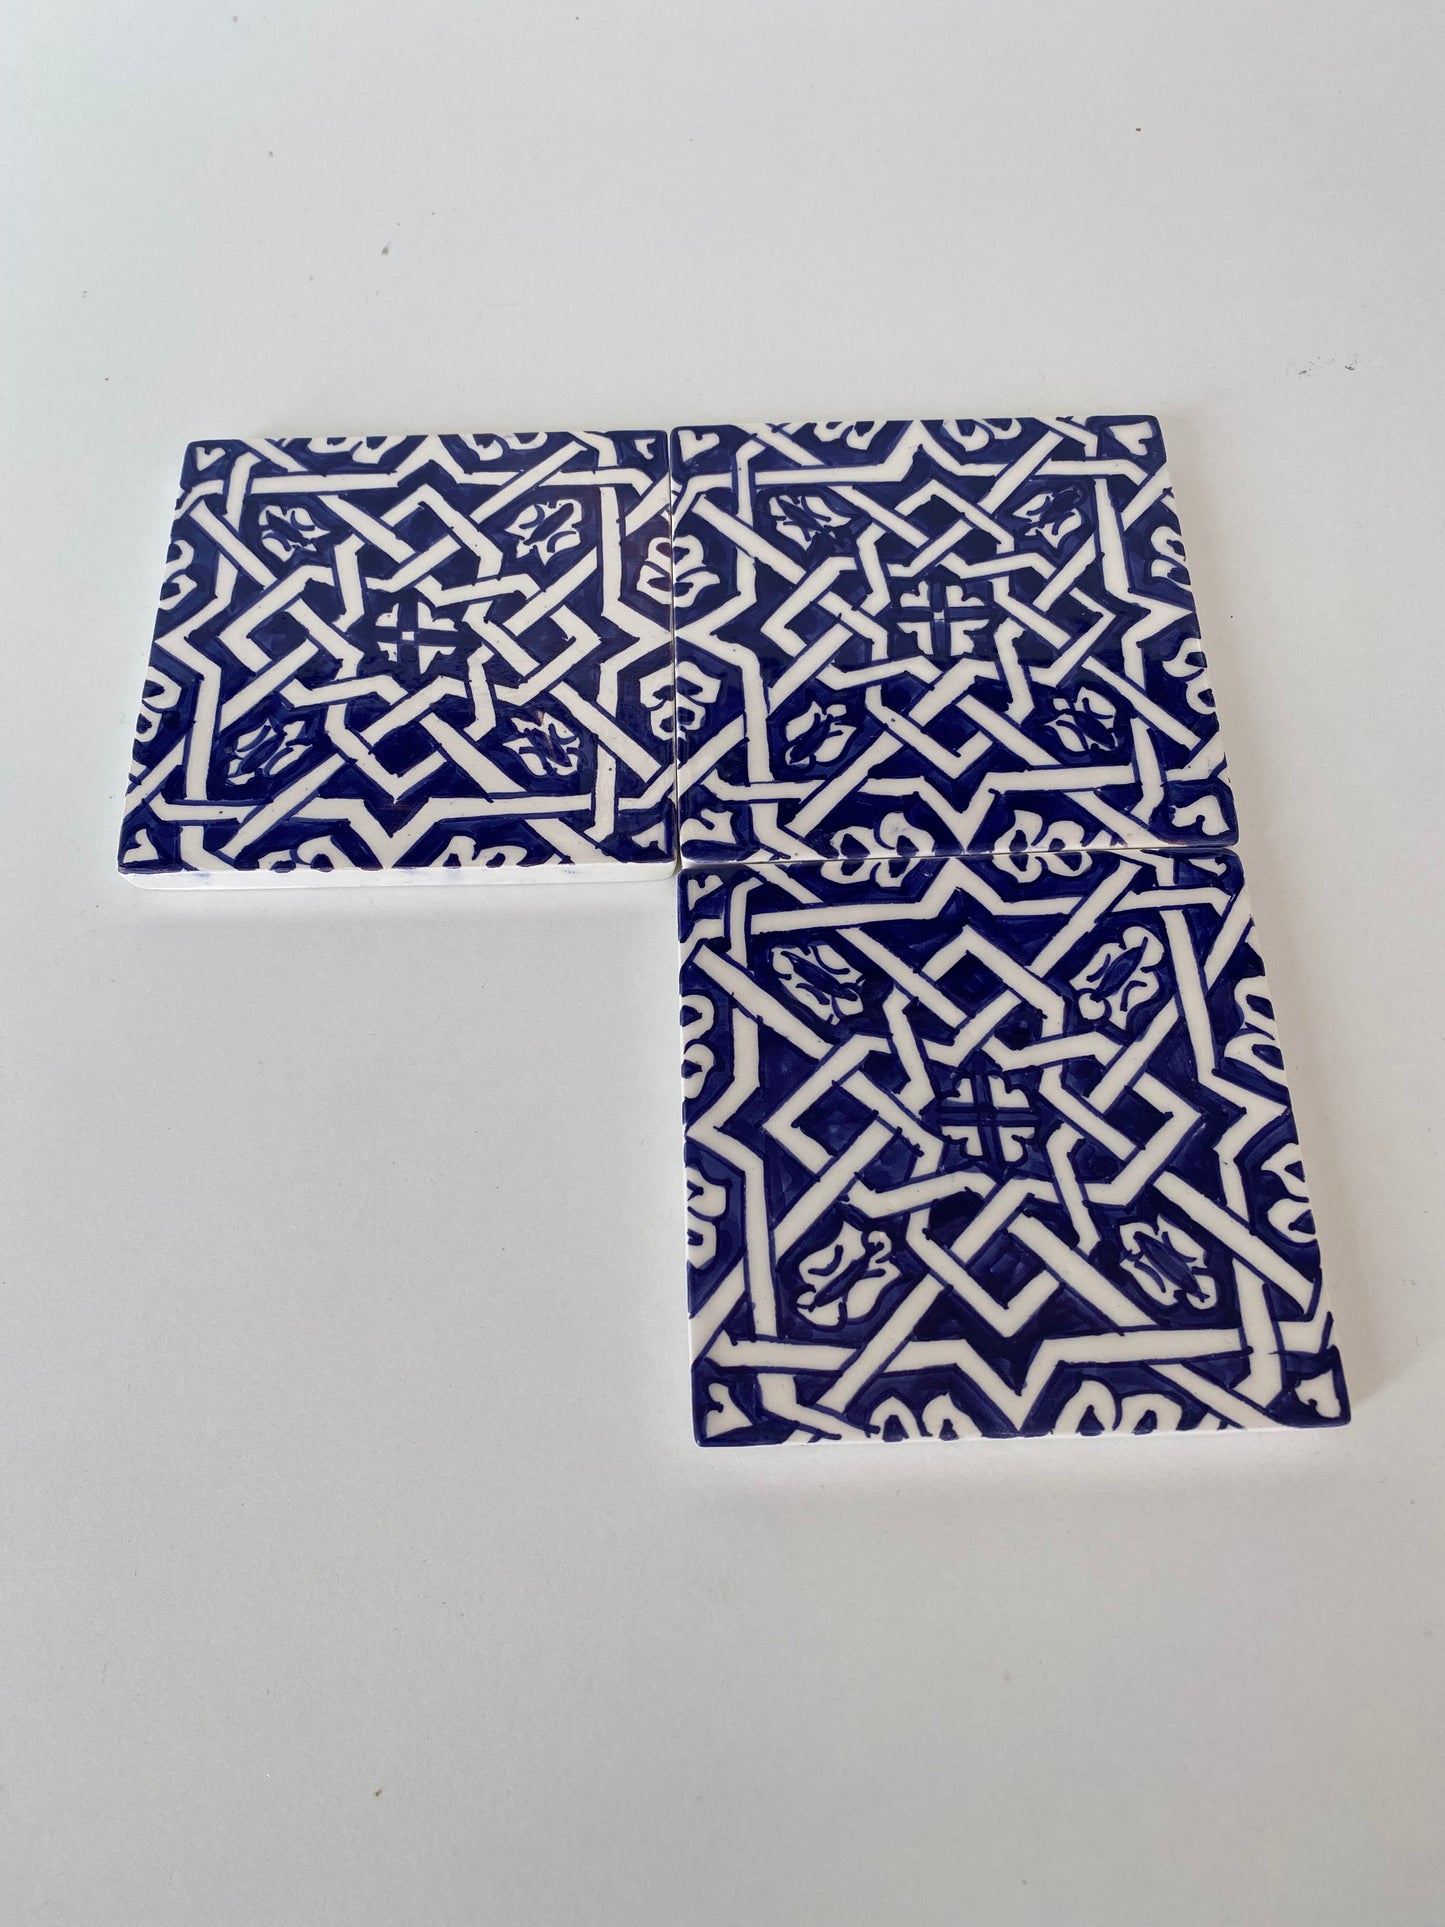 4"X4" tiles blue and white hand painted ceramic bathroom for wall and ground, tiles wall decorative